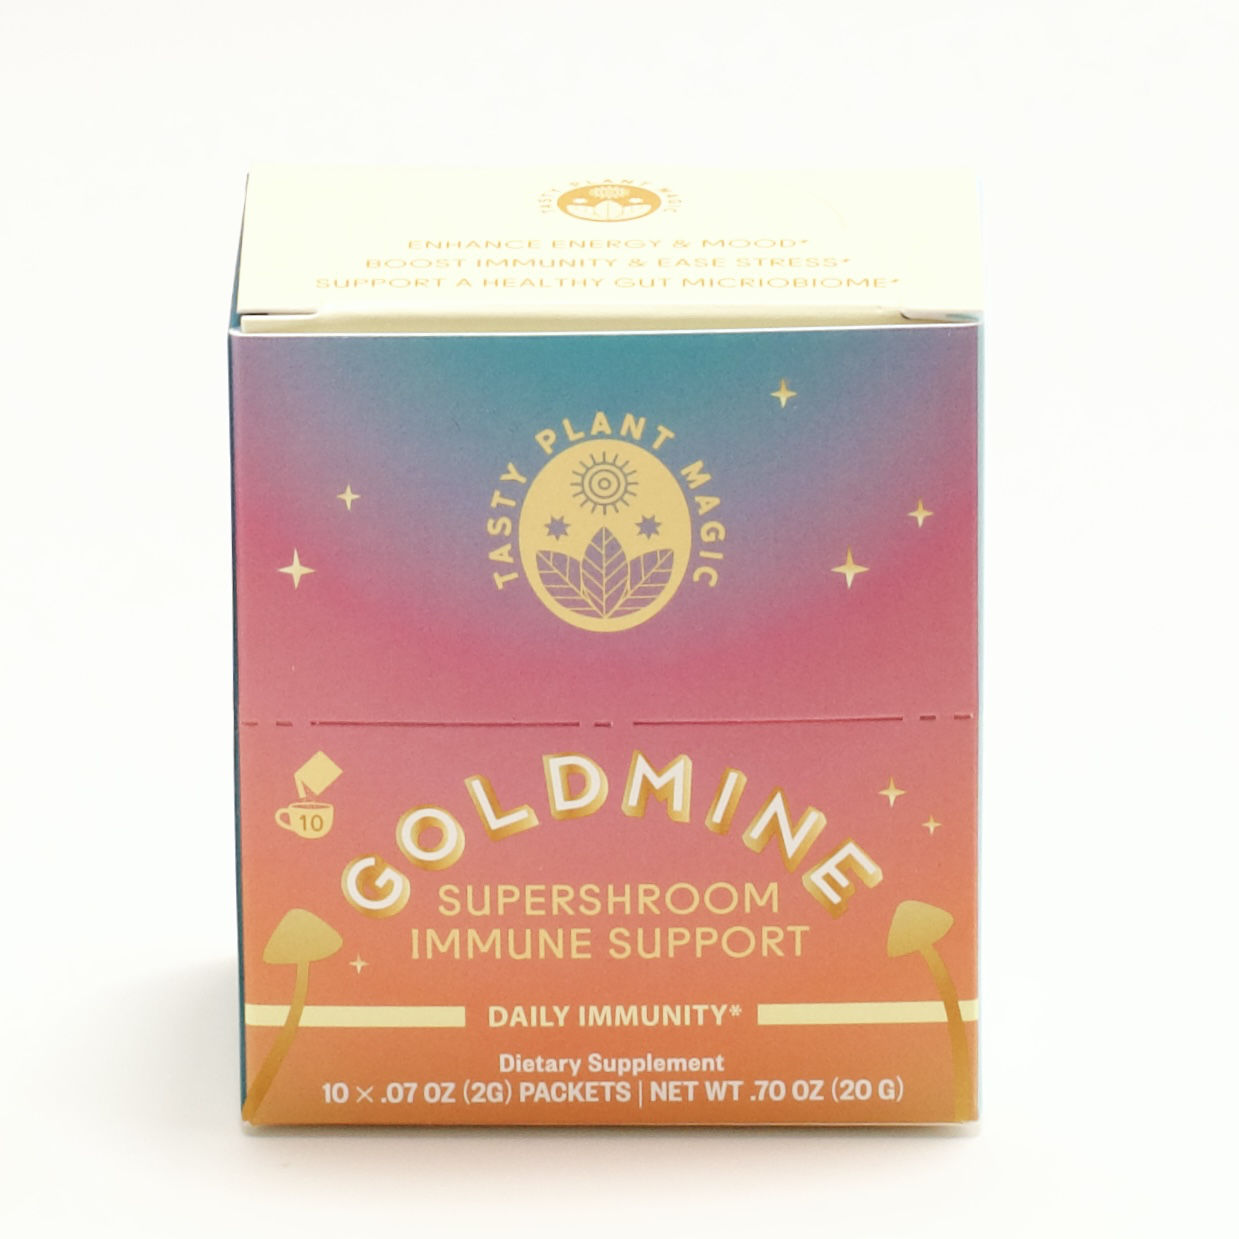 Supershroom Immunity Support Packets